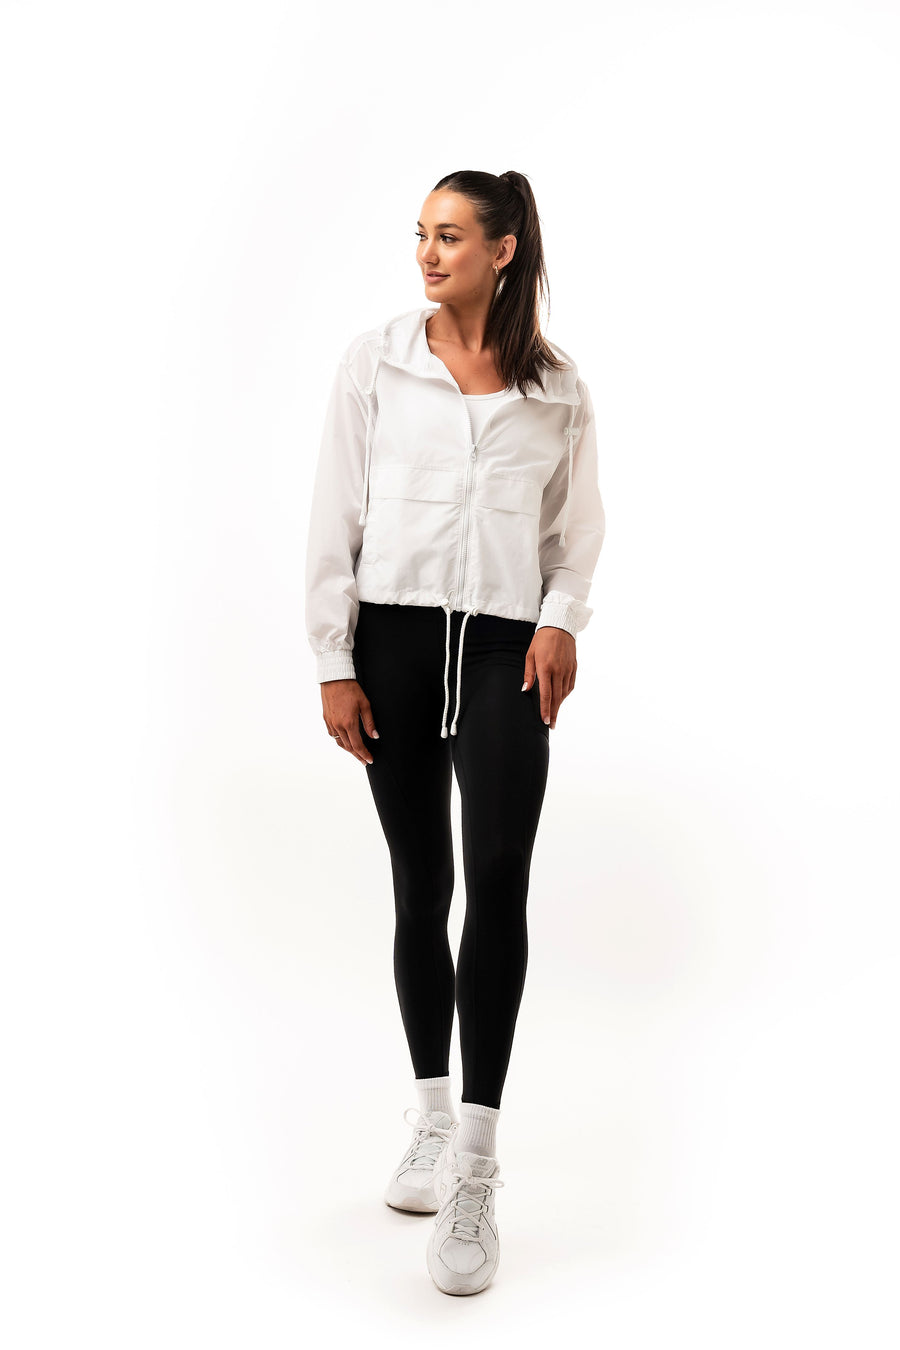 Sheer Woven Jacket - Brilliant White Jacket IVL Collective 